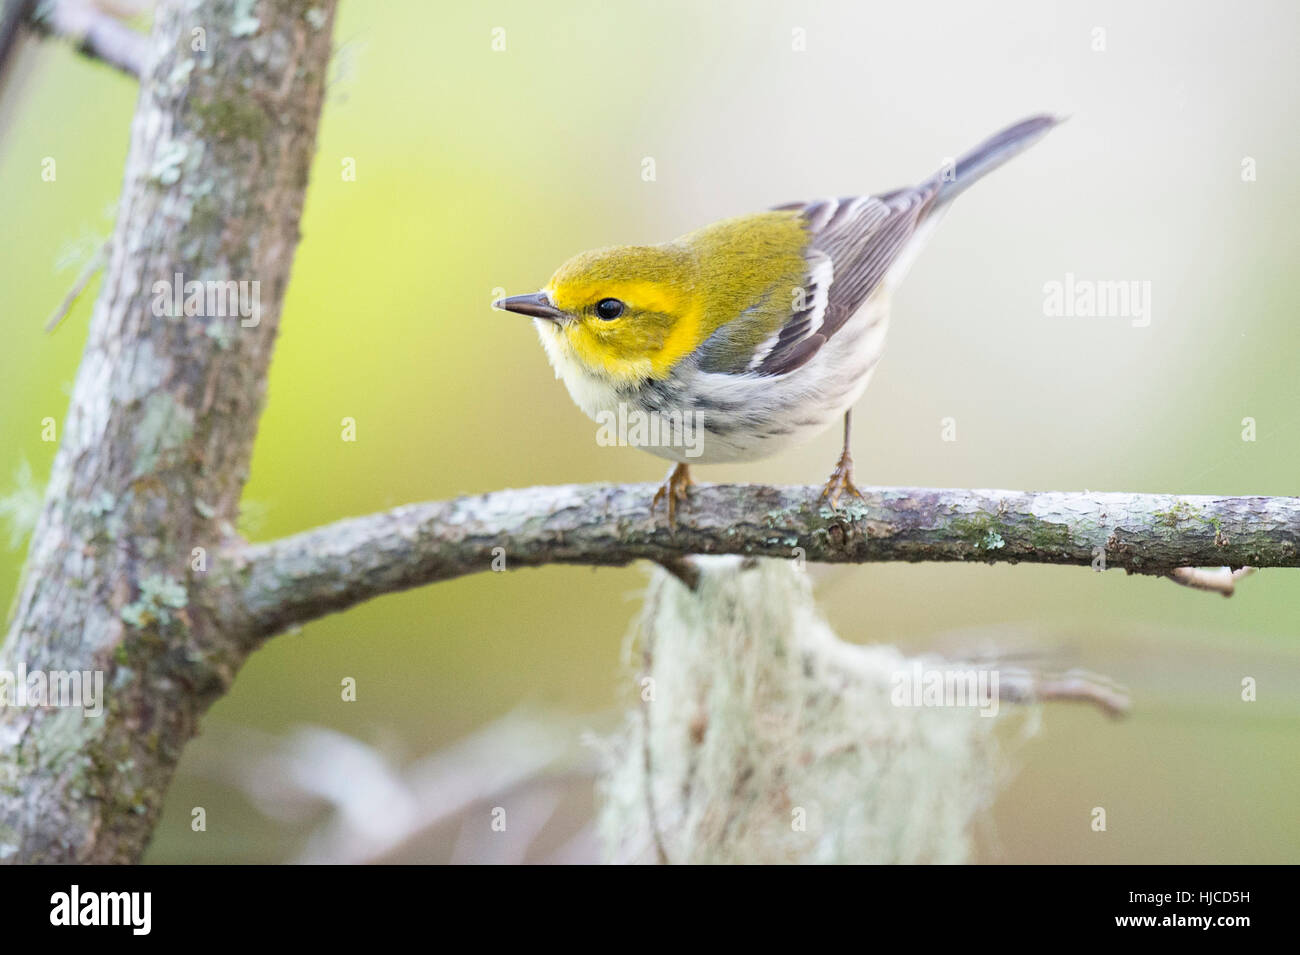 A Black-throated Green Warbler perched on a branch out in the open. Stock Photo